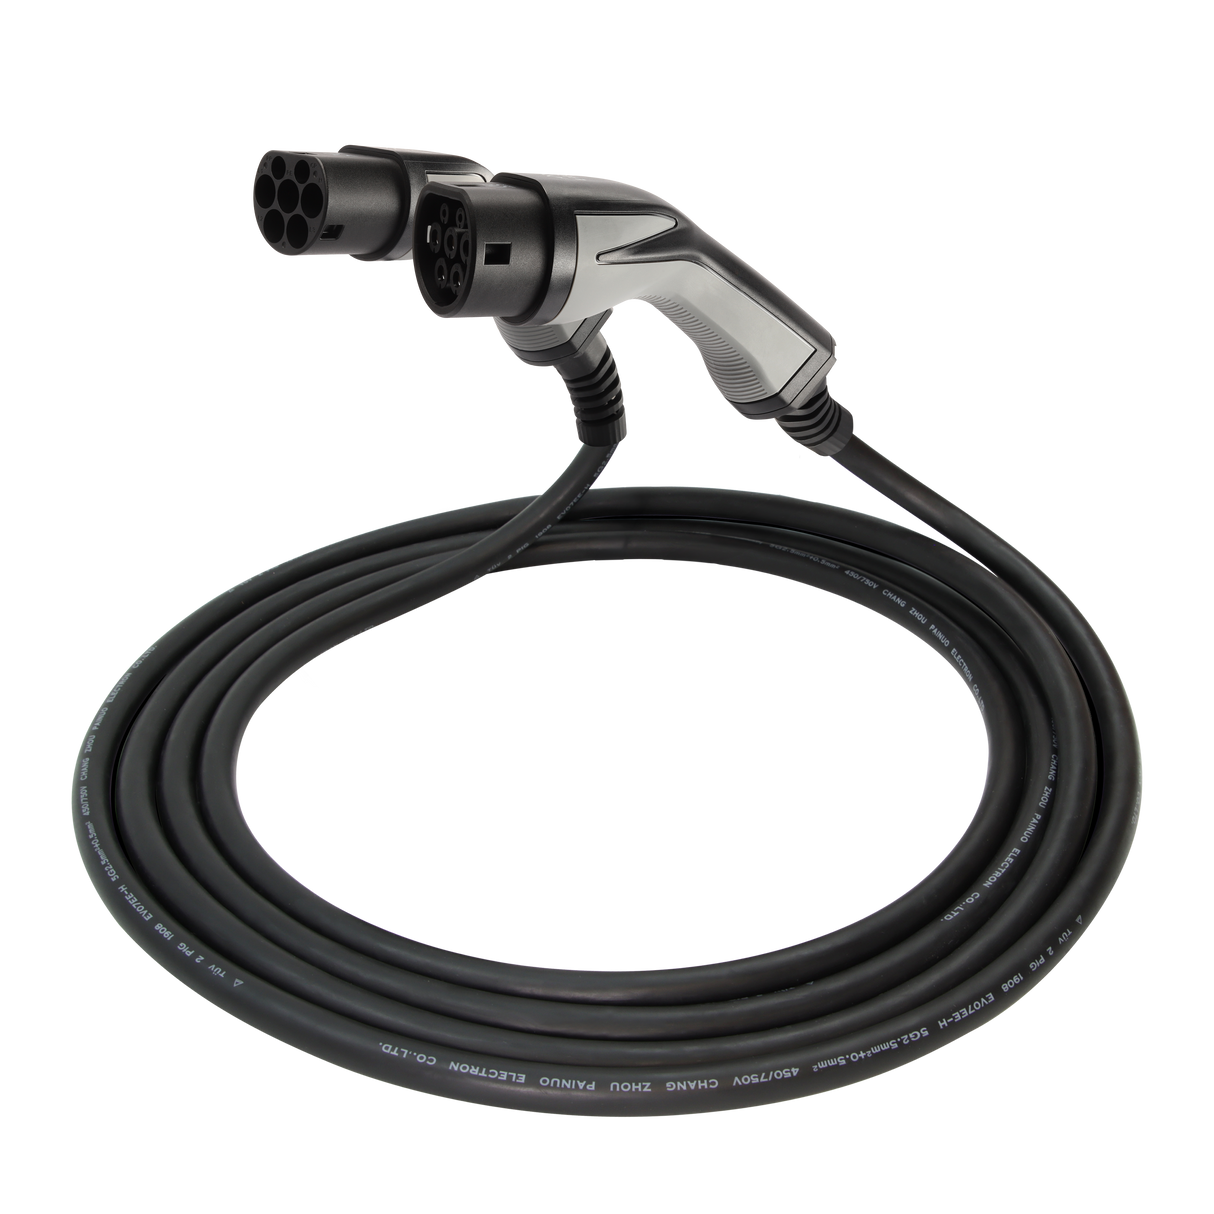 Charging cable Tesla Model Y - Erock Pro Type 2 - 16A 3 phase (11 kW)